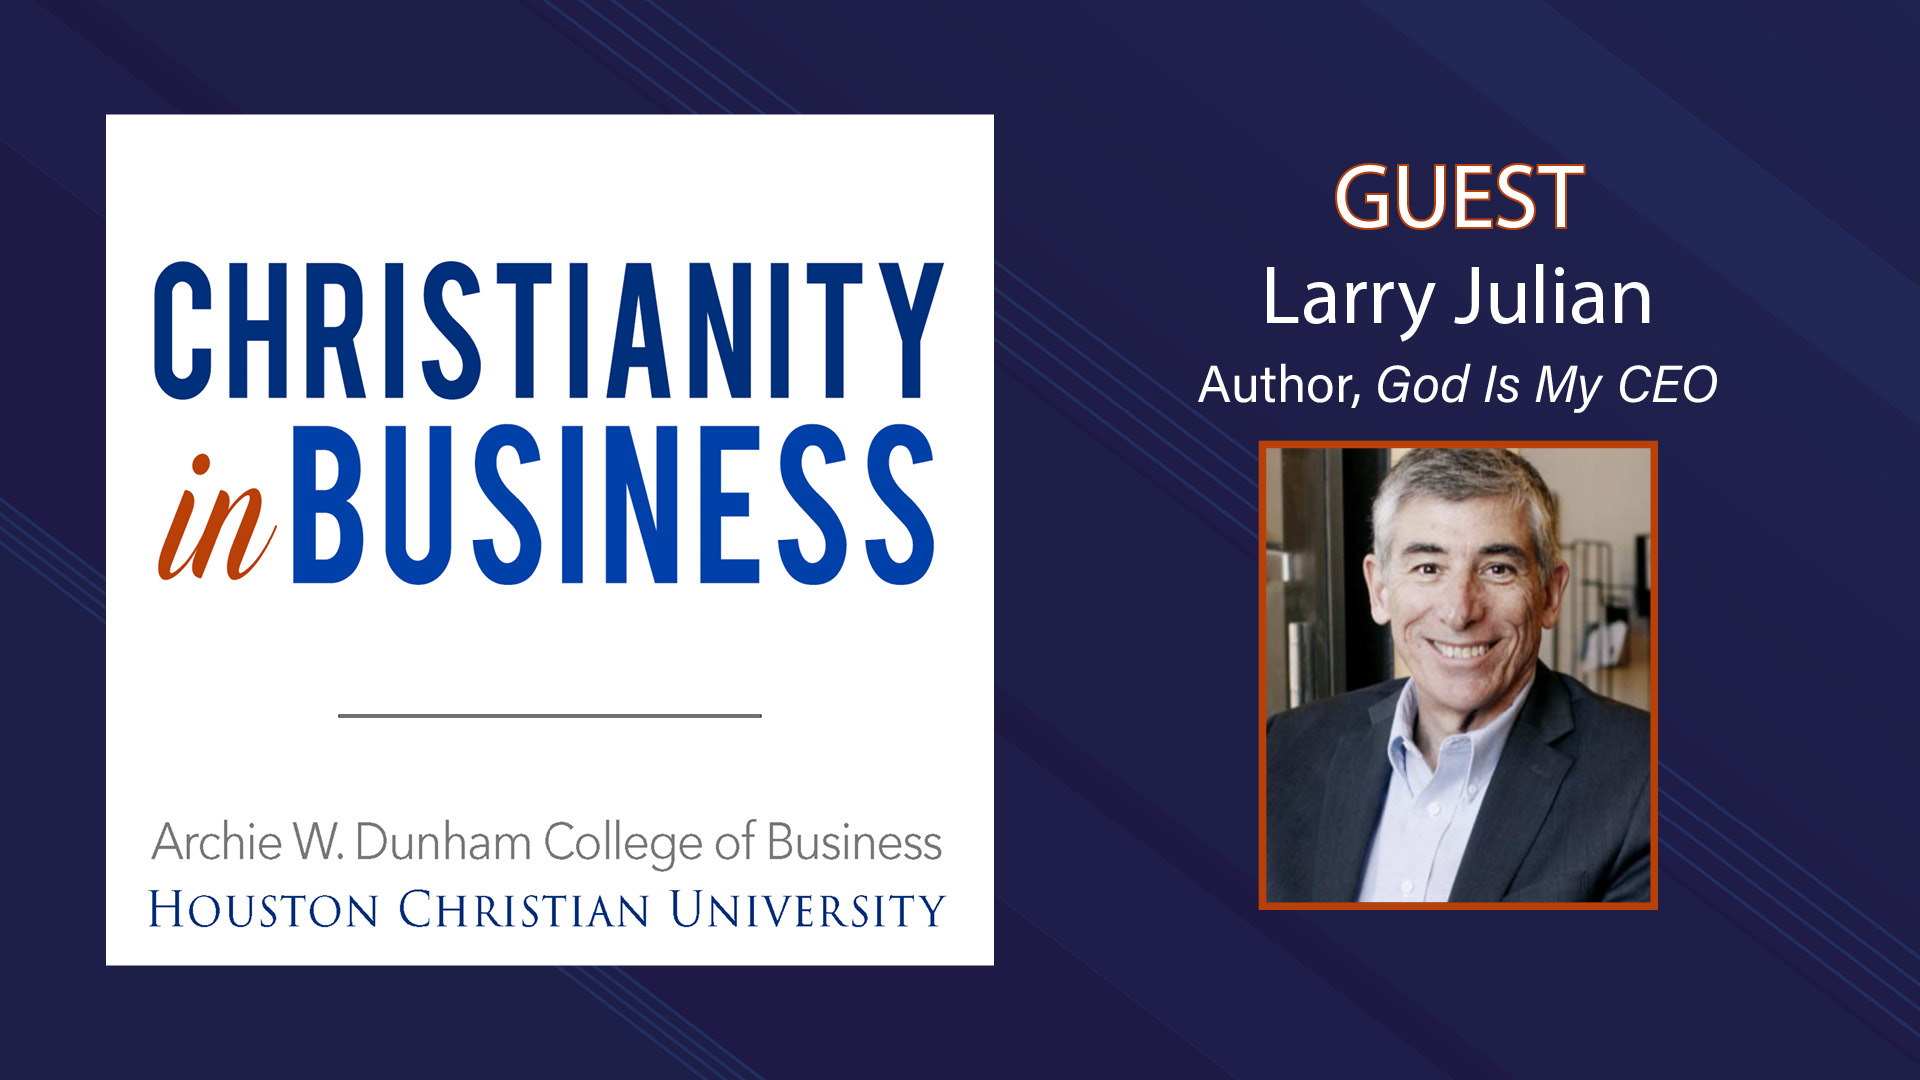 Larry Julian, author of "God Is My CEO" joins the Christianity in Business Podcast.